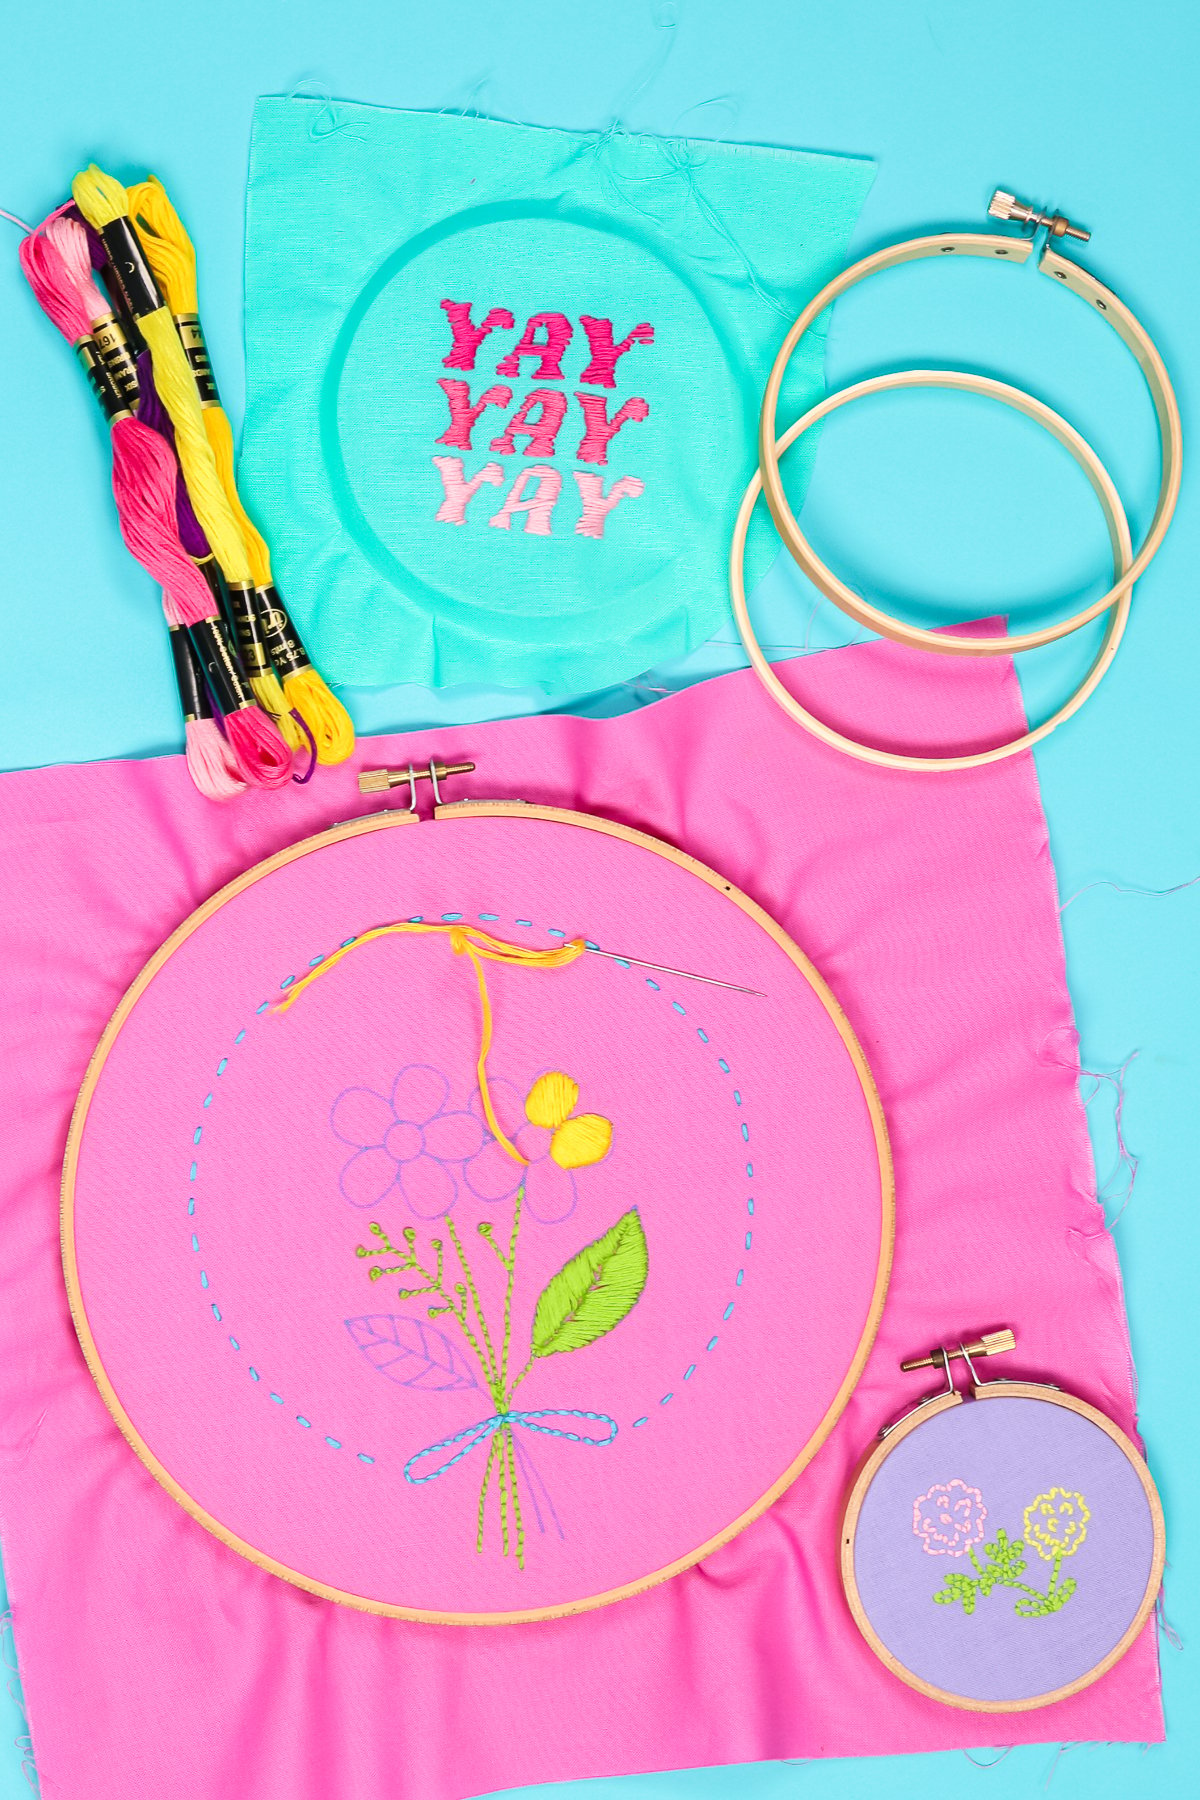 how to draw embroidery patterns with a cricut machine